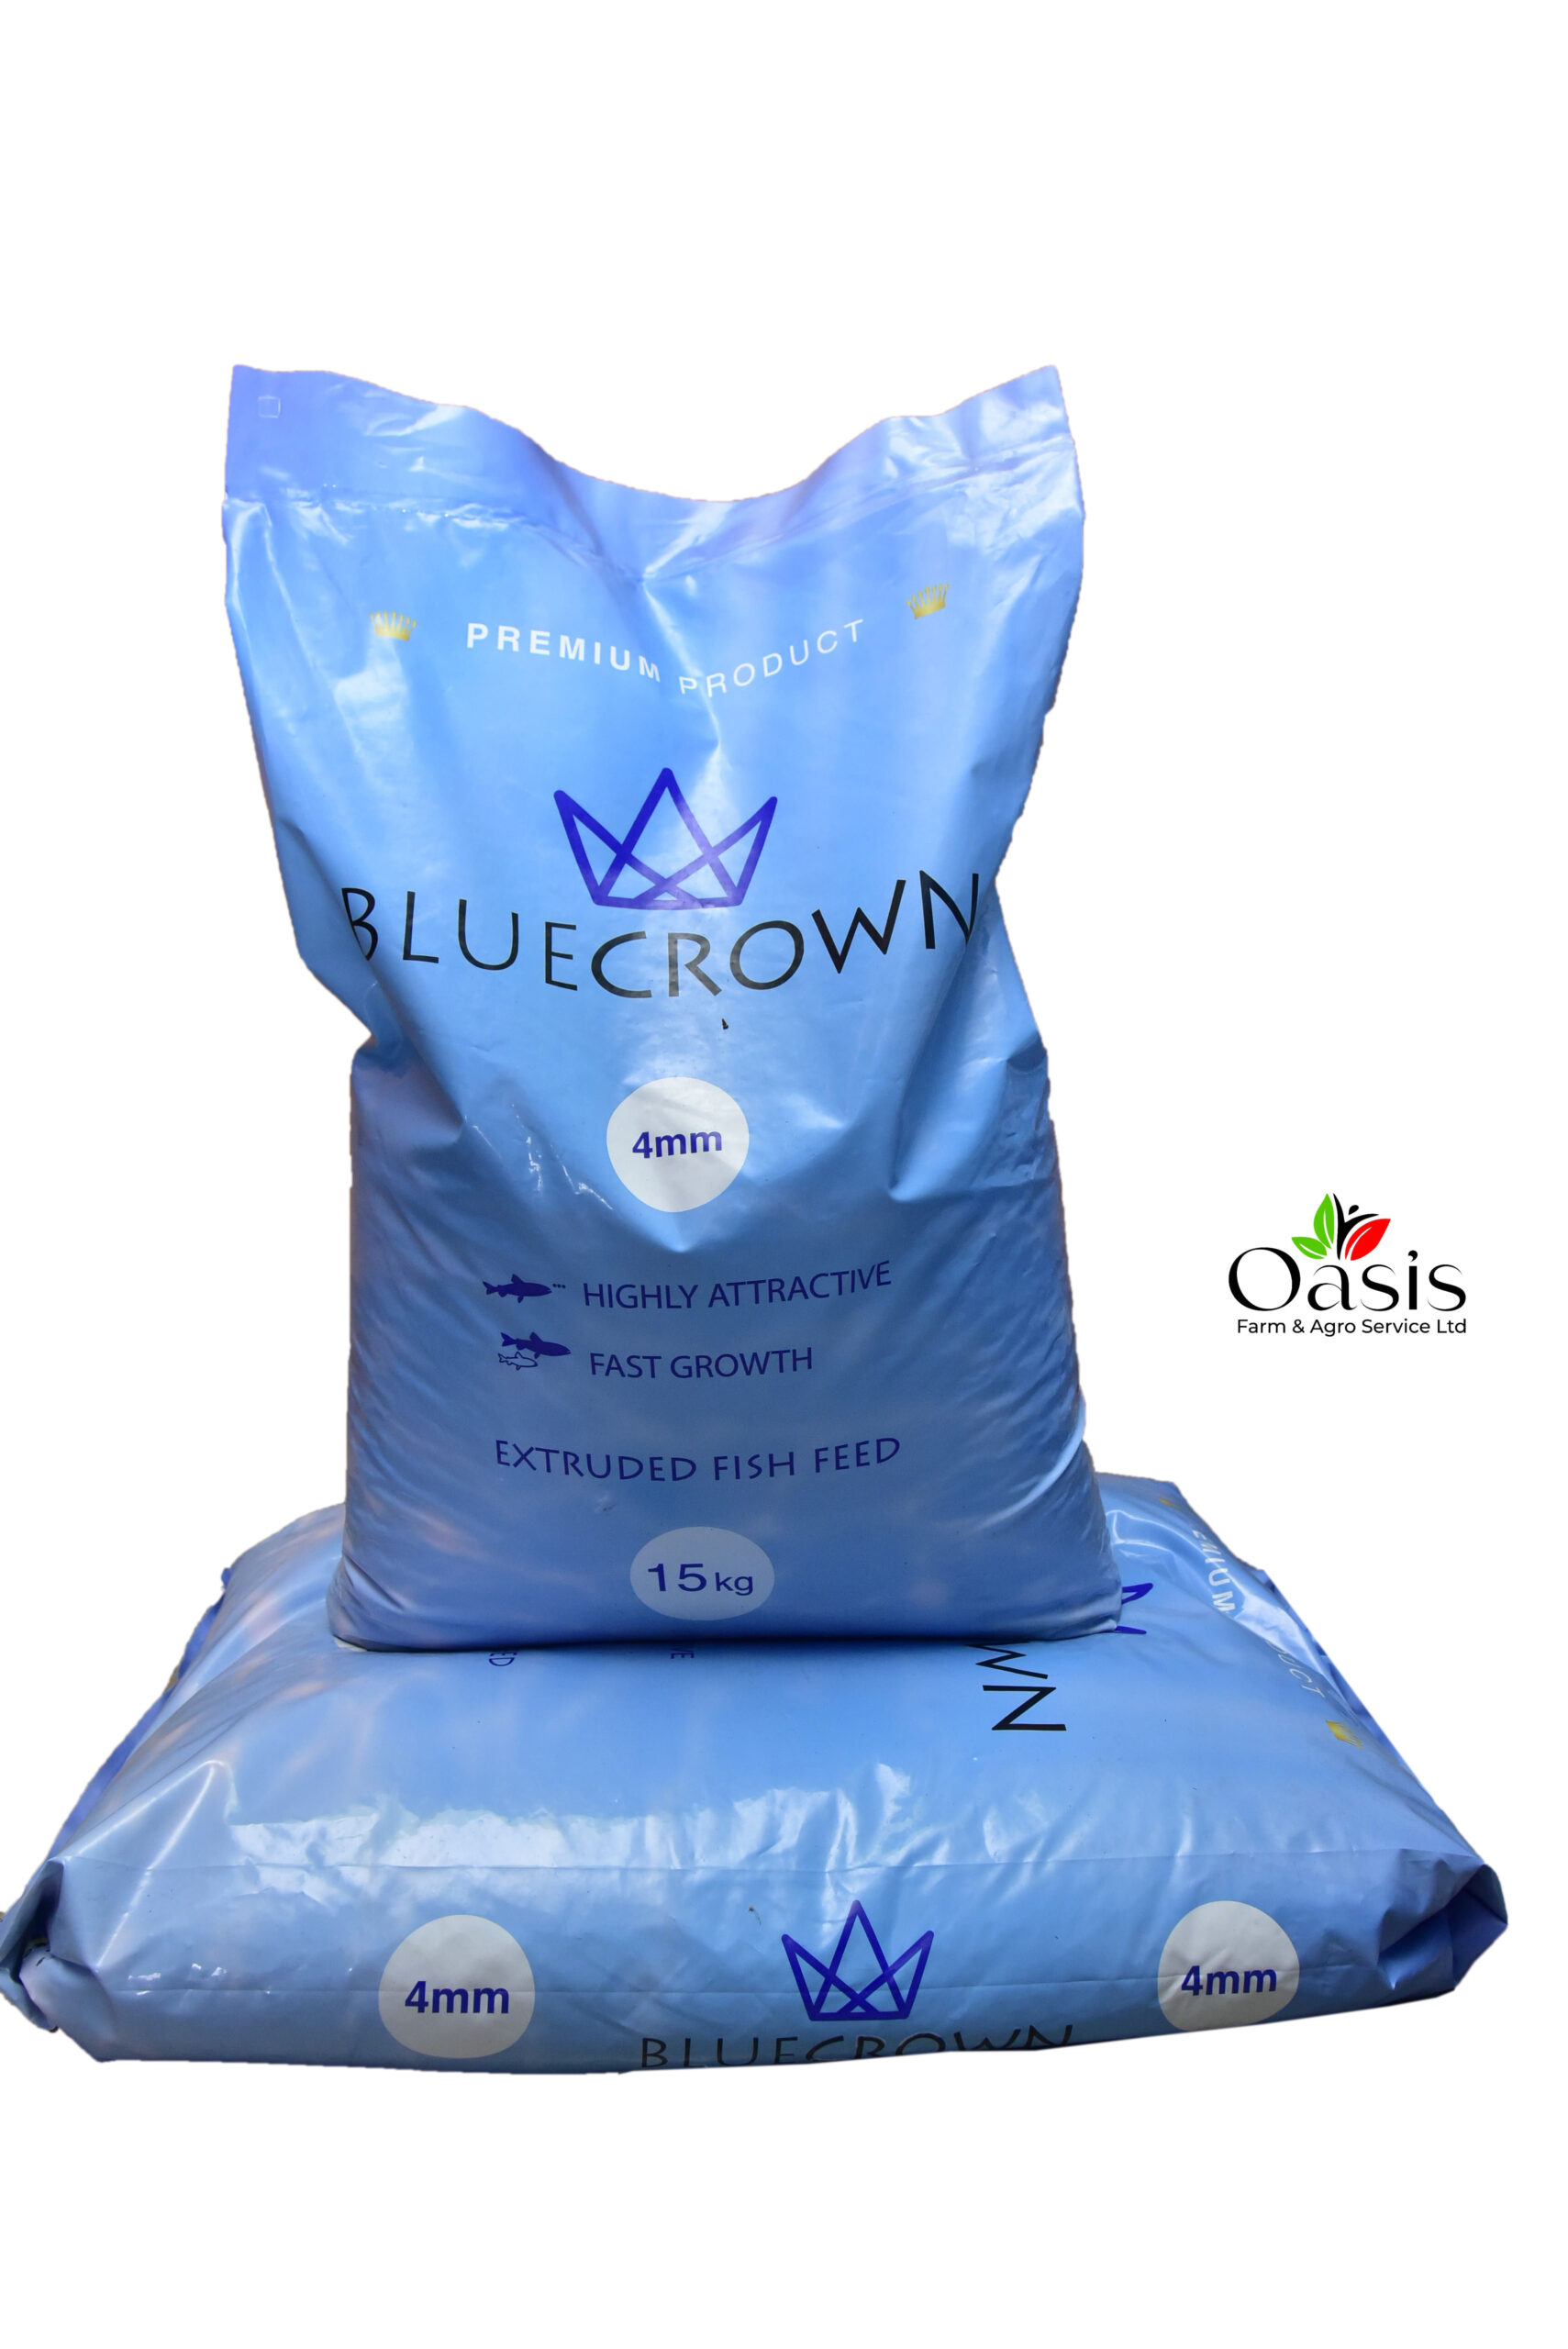 Bluecrown 4mm Extruded Catfish Feed 15kg